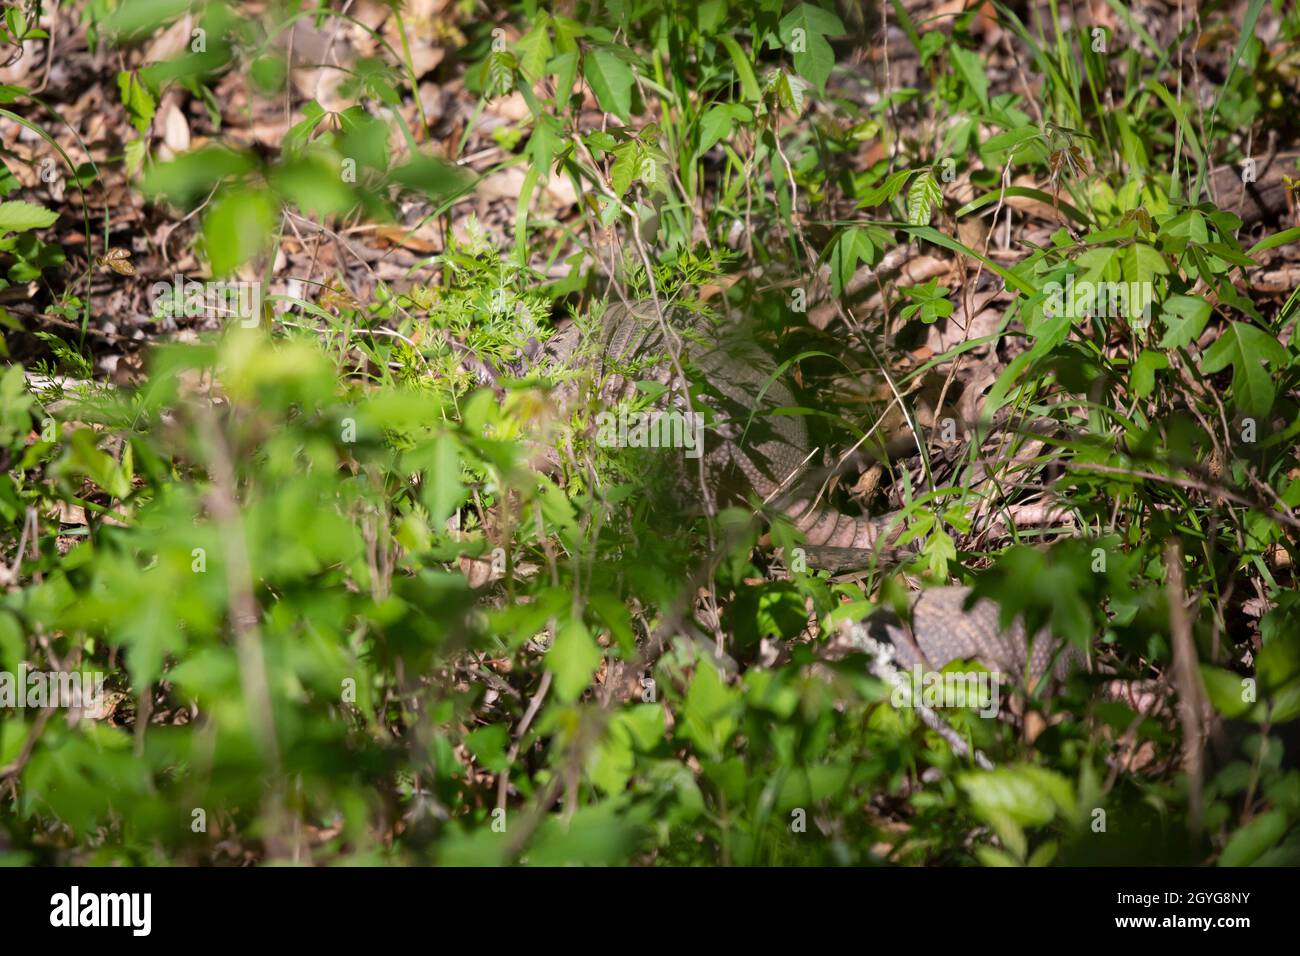 Pair of small nine-banded armadillos (Dasypus novemcinctus) foraging for insects in grass and weeds Stock Photo